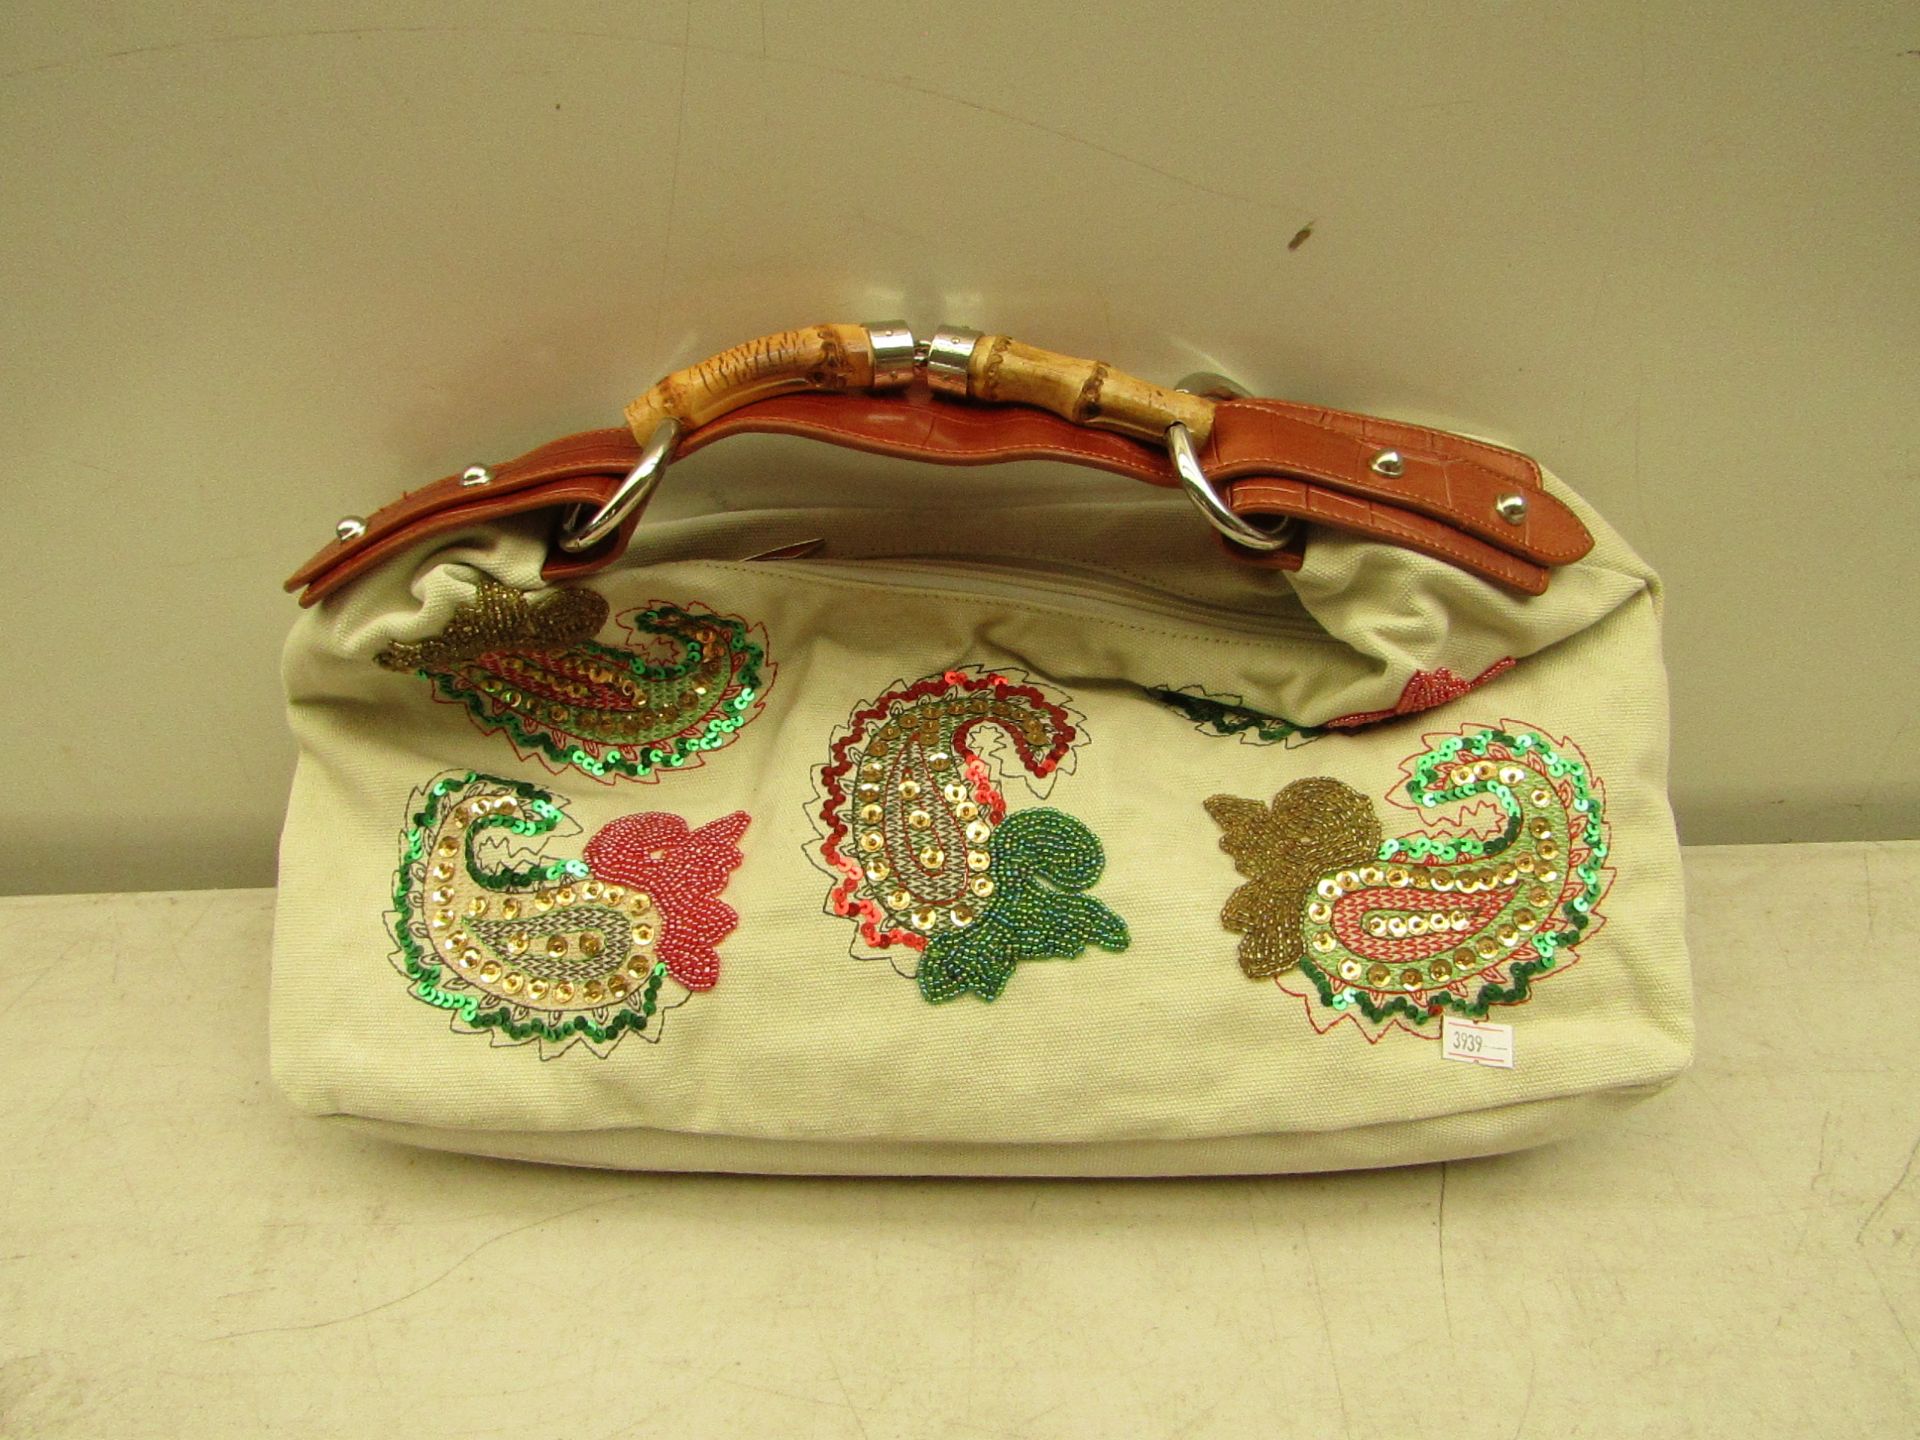 Ivory coloured handbag with sequin patterns, new and packaged.